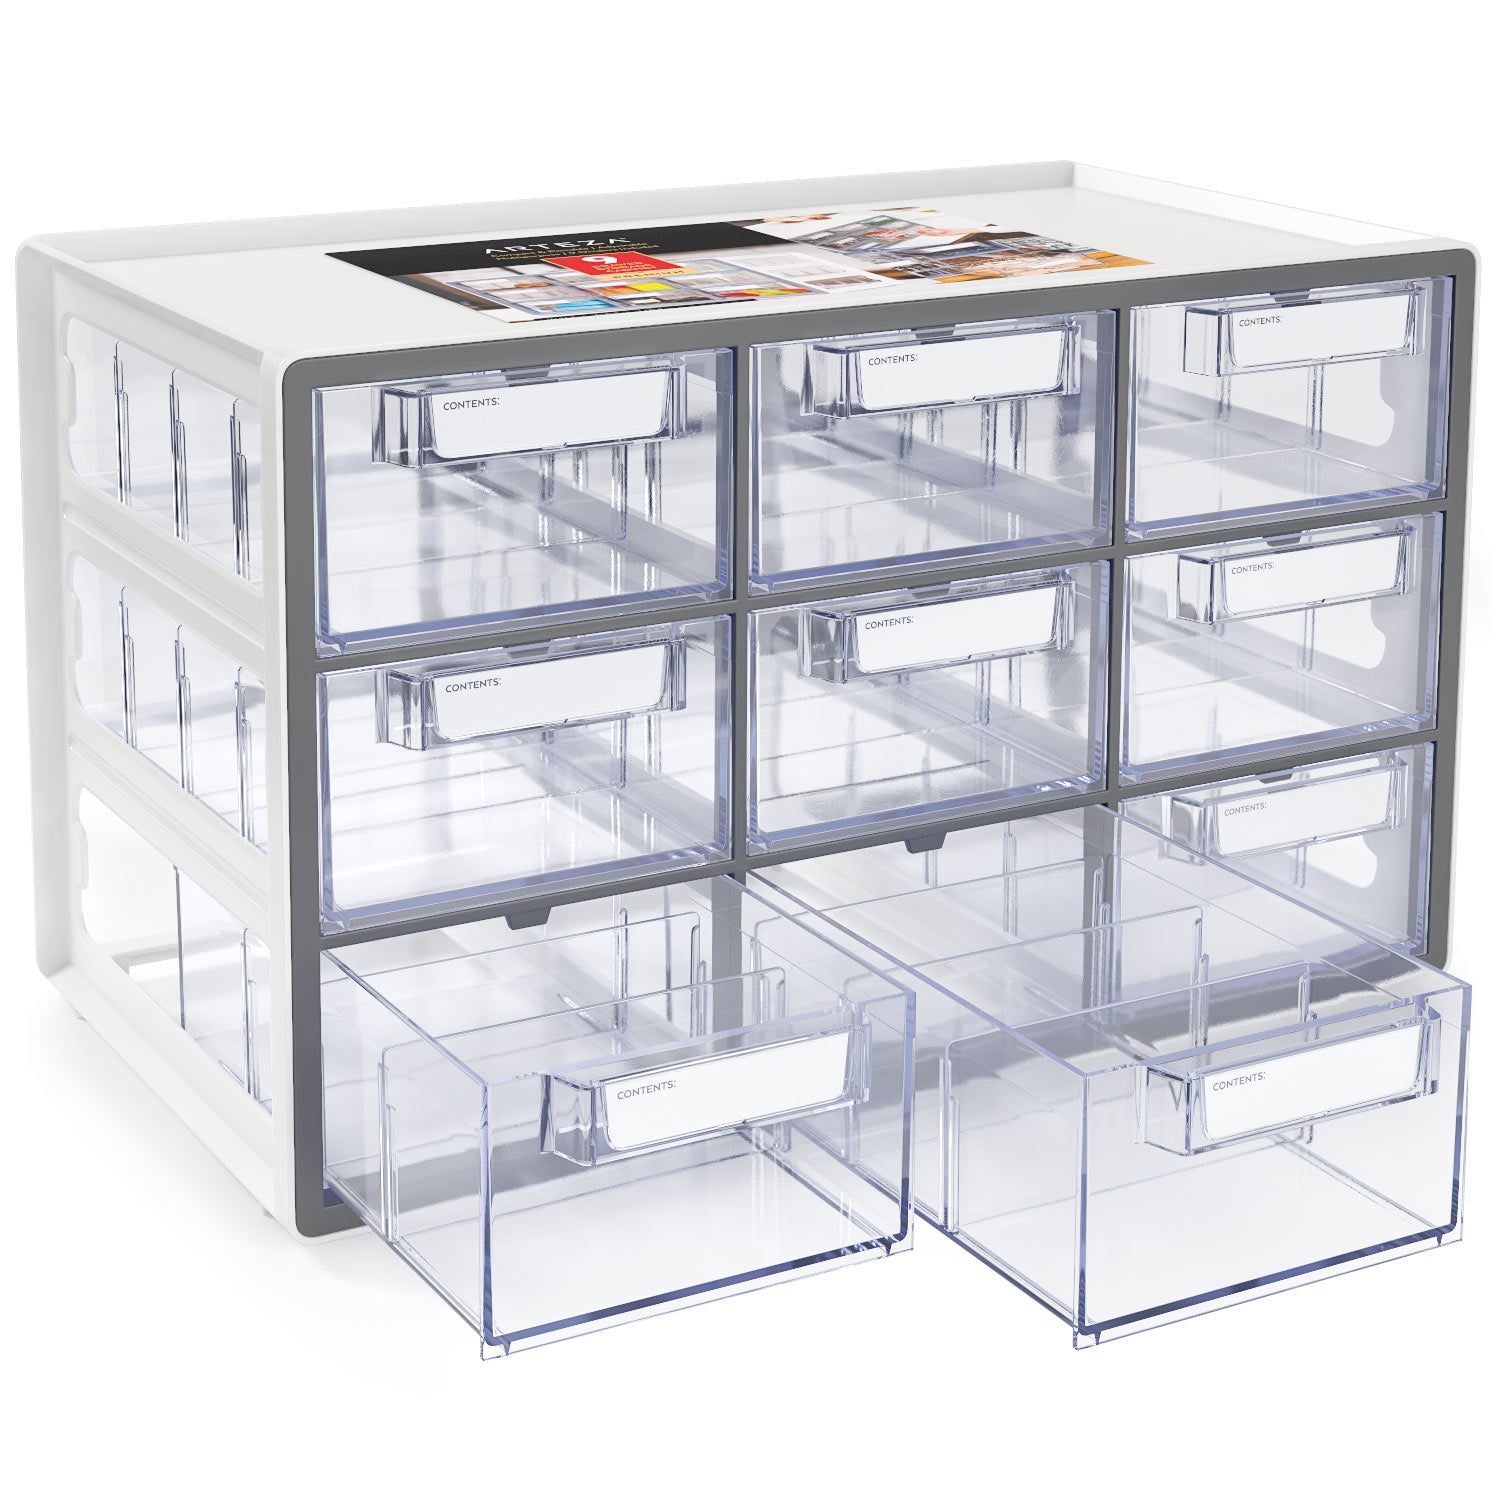 The Clear 9 Drawer Storage Cabinet